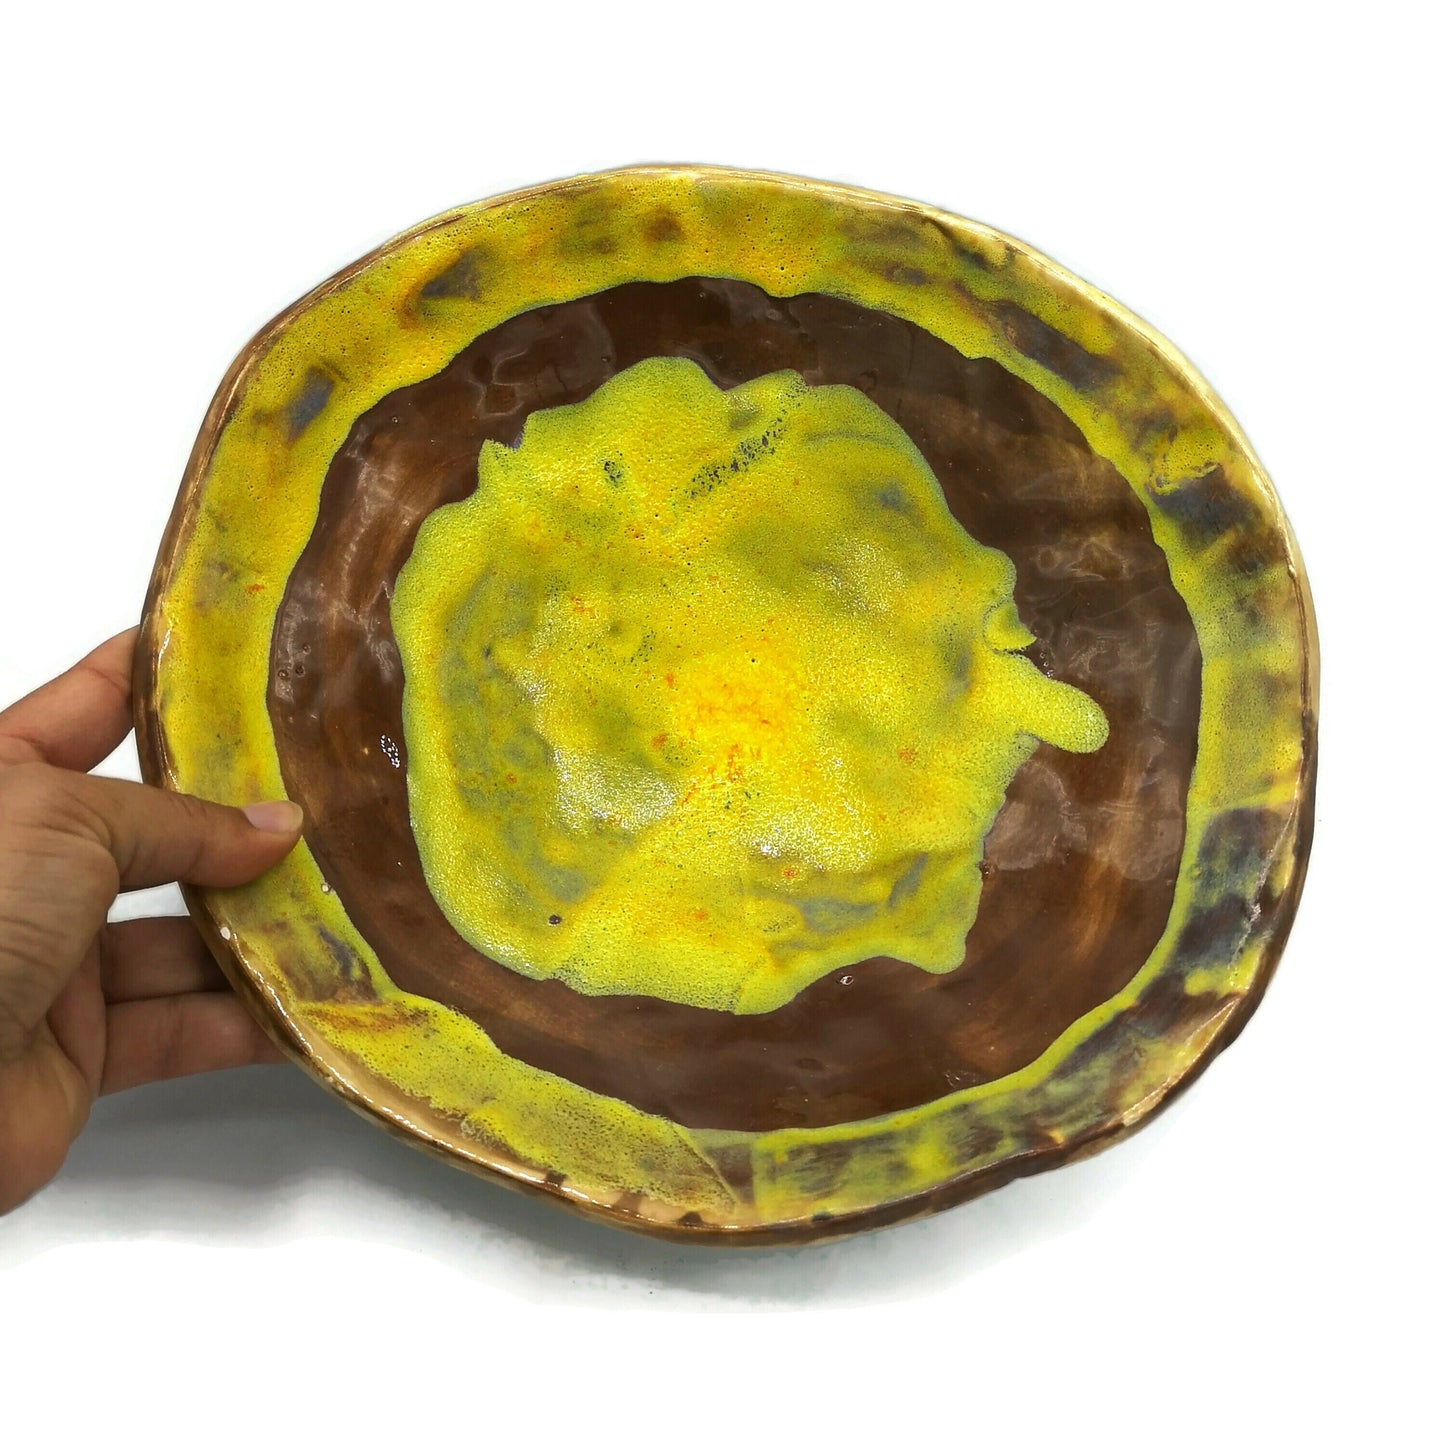 Large Fruit Bowl, Handmade Ceramic Decorative Bowl, Mothers Day Gift From Daughter, Housewarming Gift First Home - Ceramica Ana Rafael